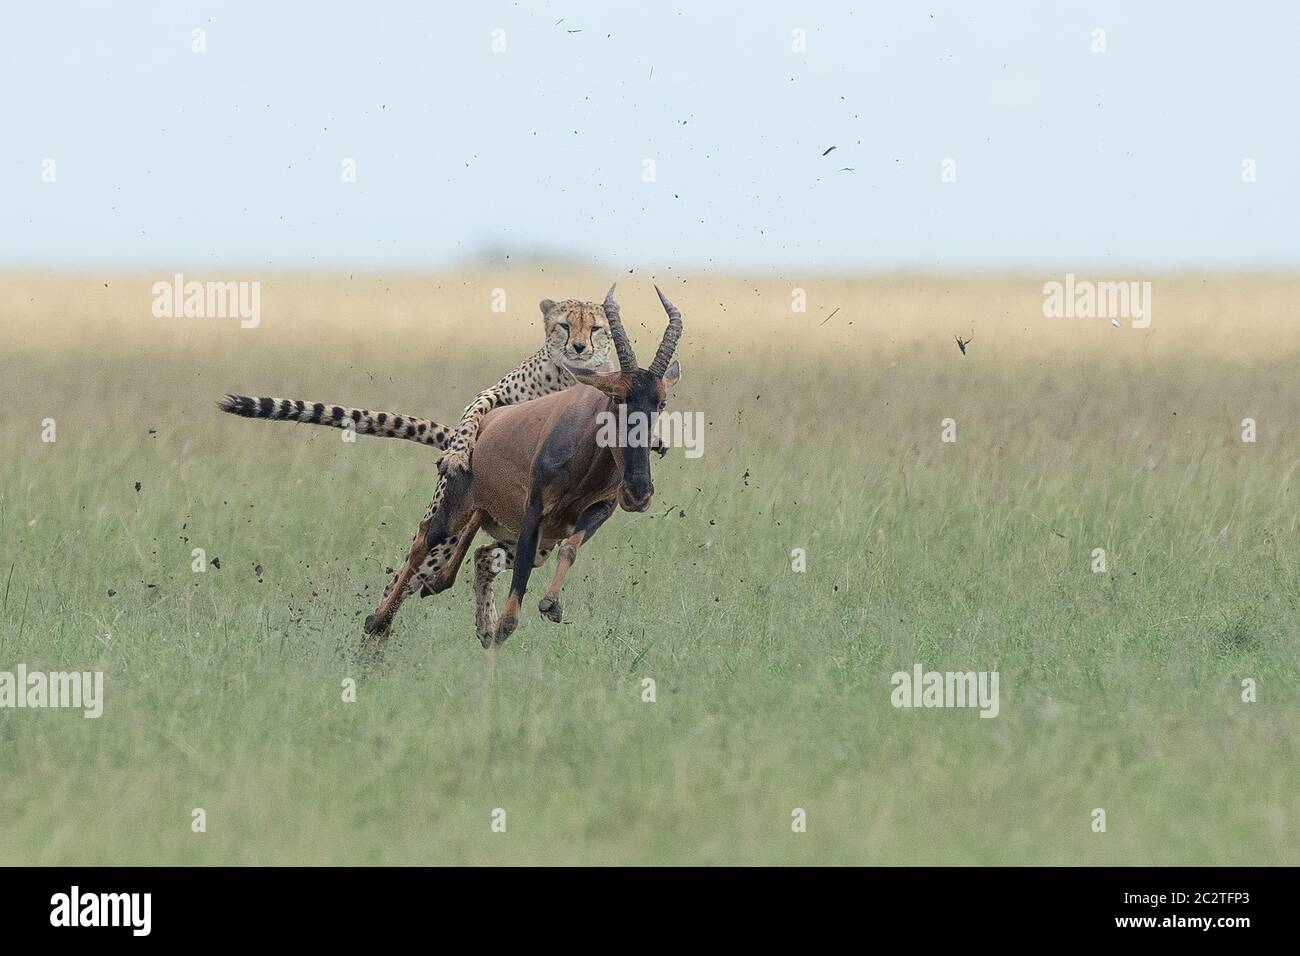 KENYA: The cheetah gets claws on the fleeing topi.  AMAZING photos show a cheetah RIDING ON TOP of a galloping antelope in a frantic race for life. Re Stock Photo